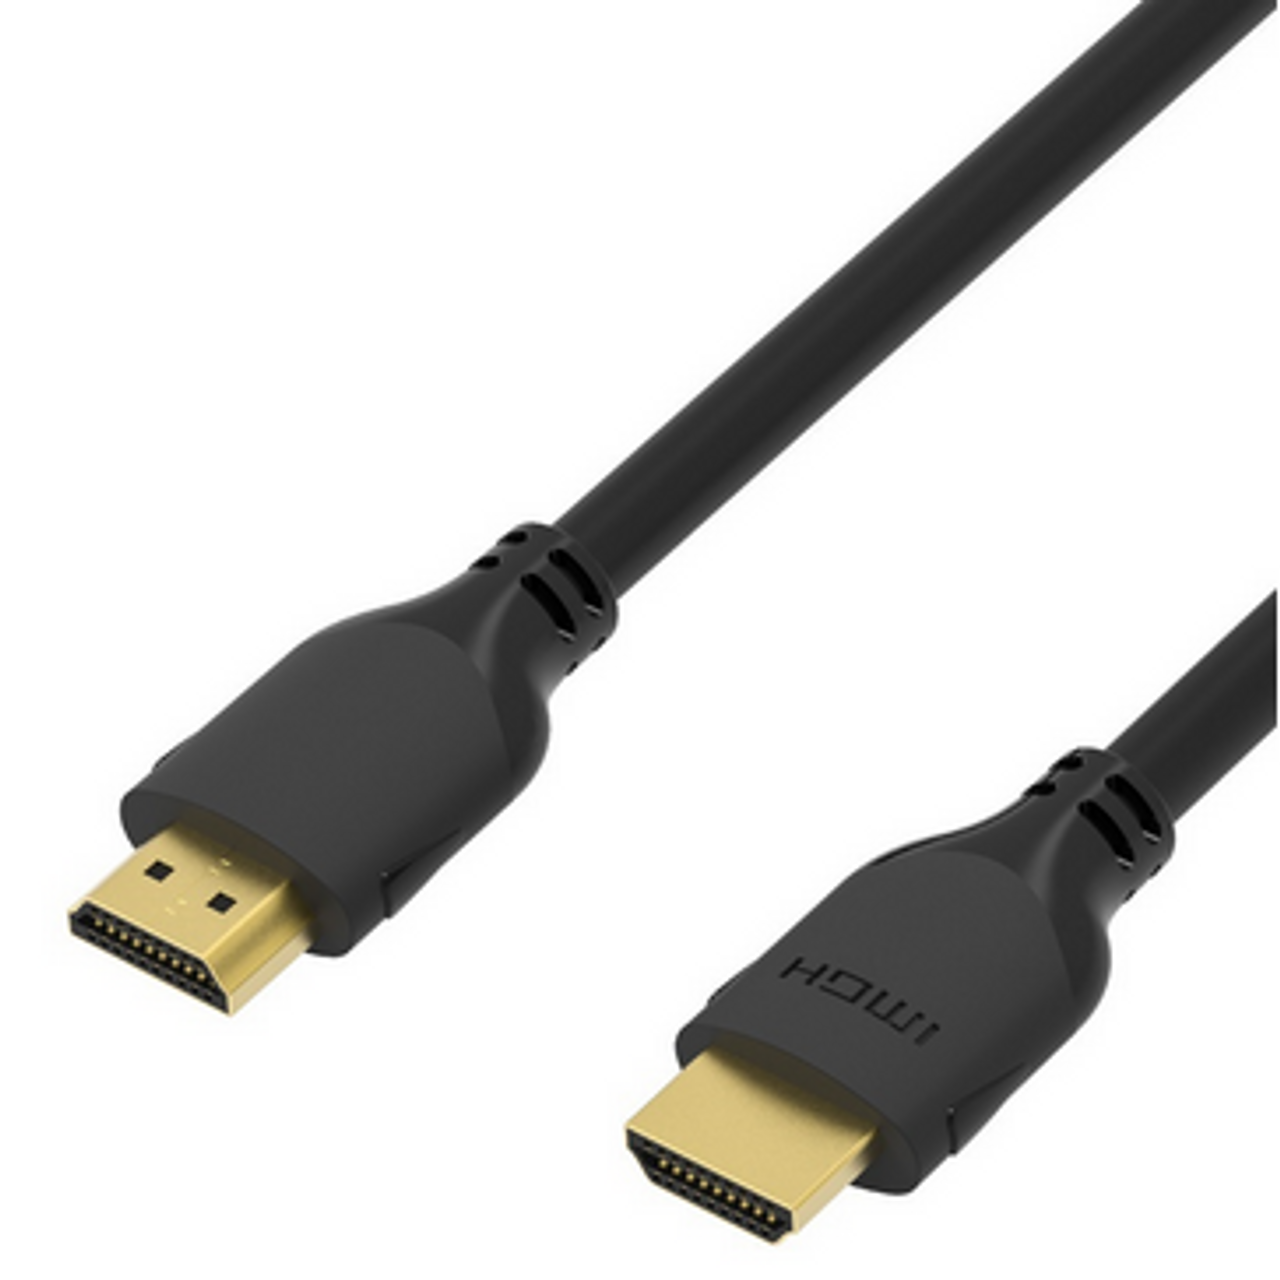 20 ft. HDMI to HDMI Cable